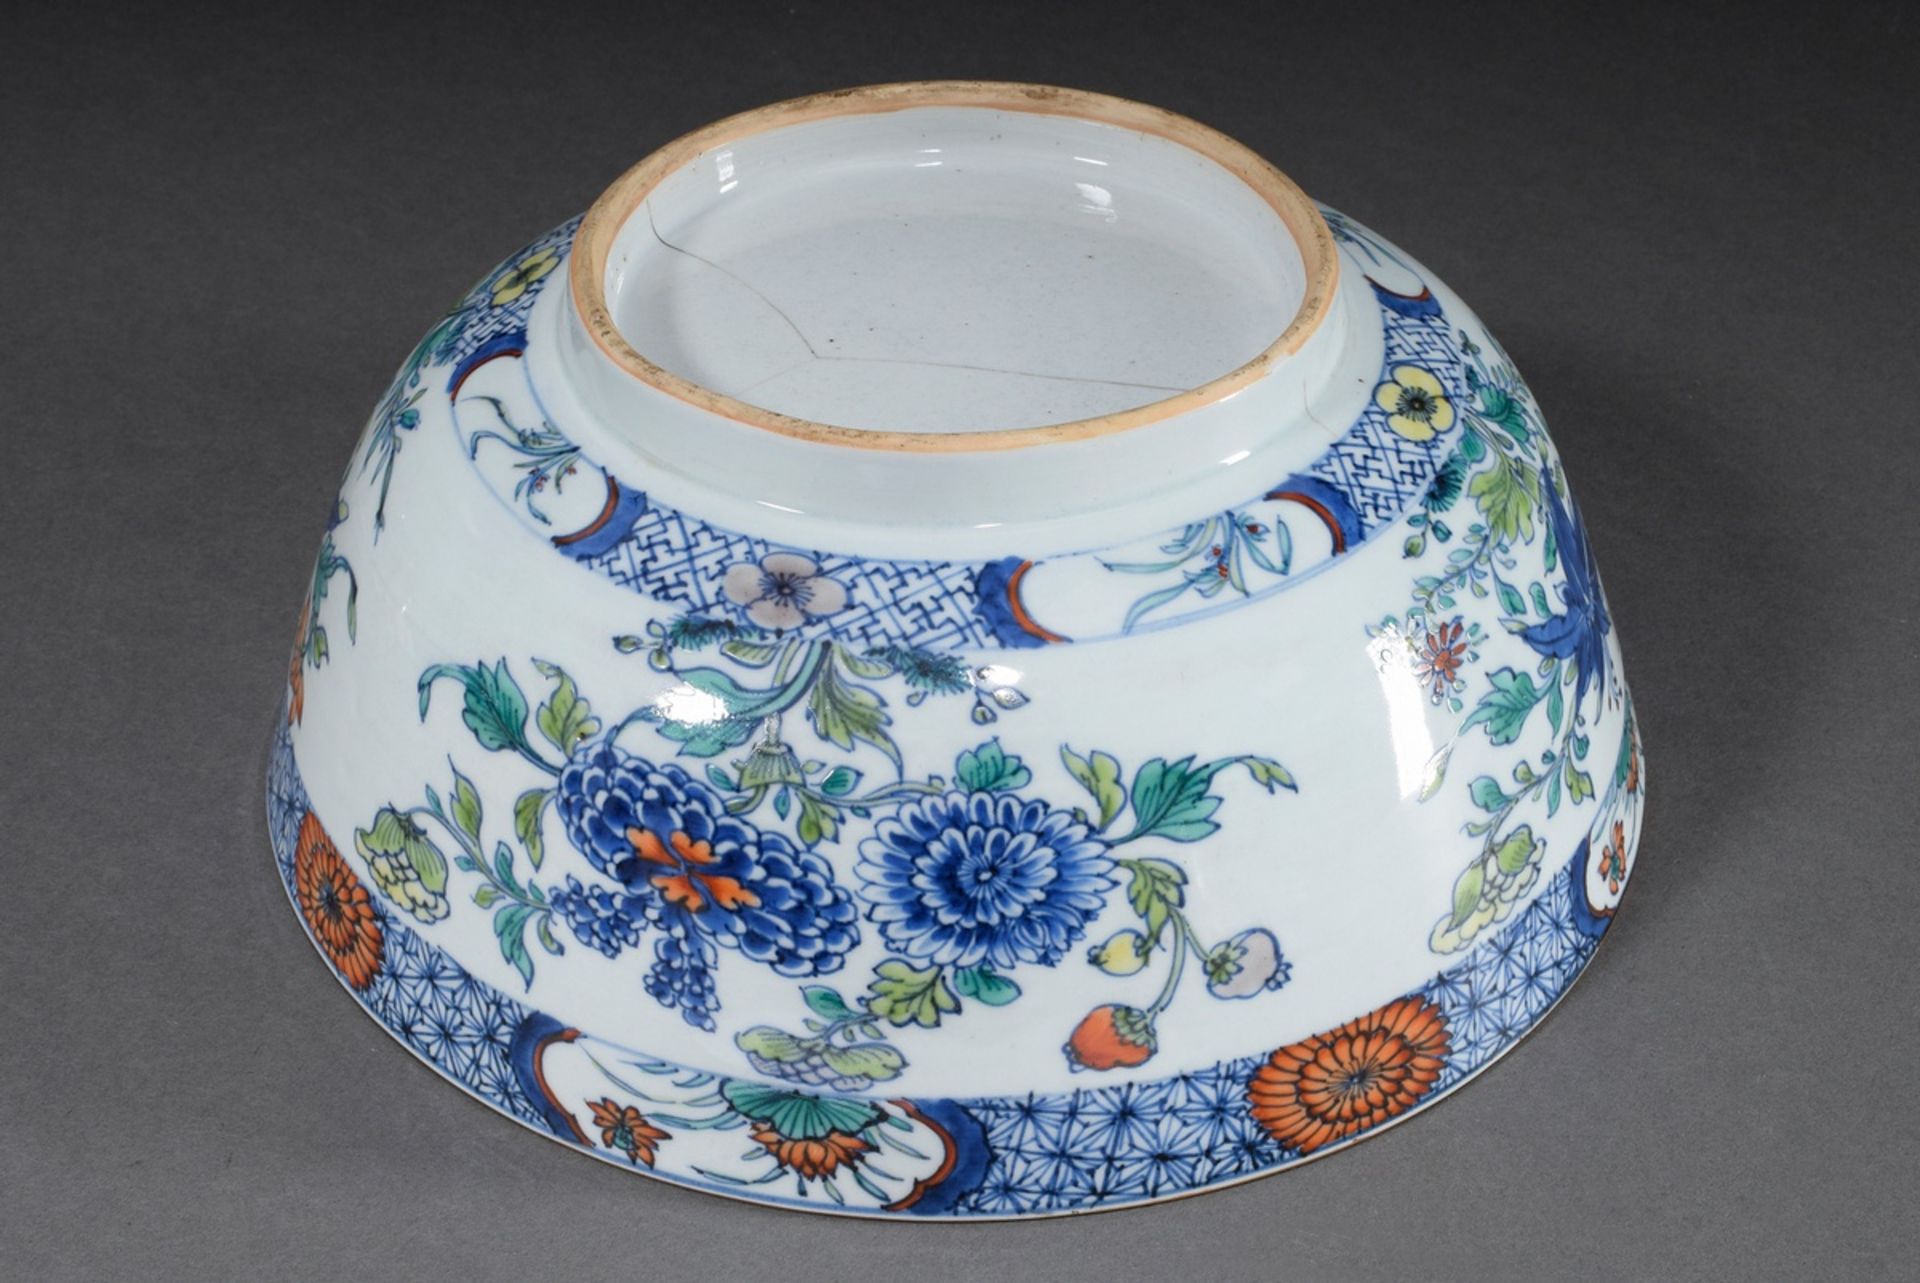 Large doucai bowl with floral blue painting and coloured decoration, China probably 2nd half 18th c - Image 3 of 4